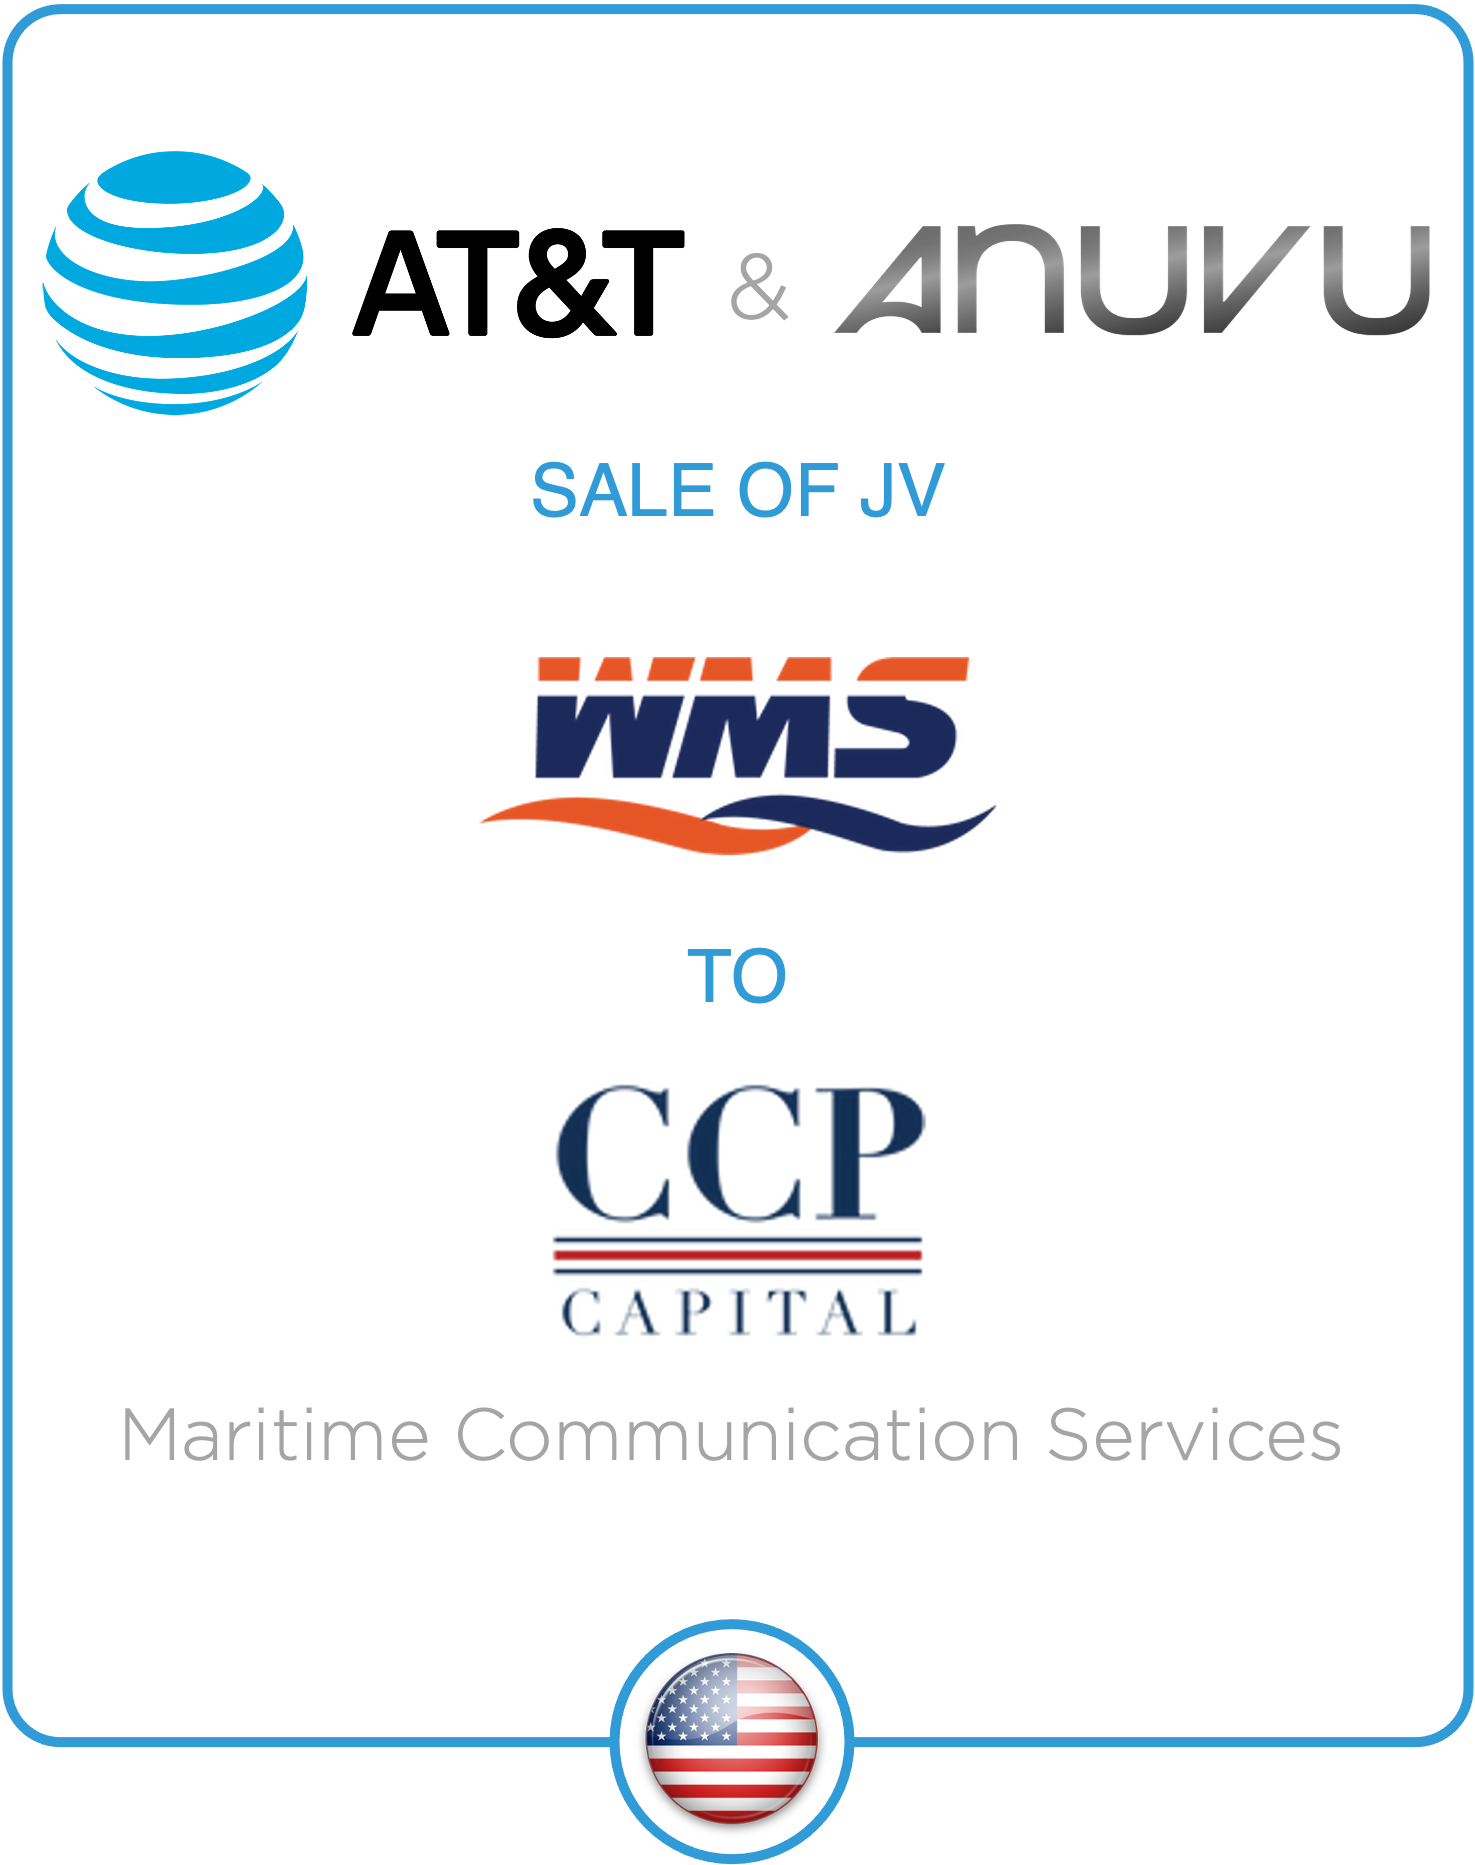 Drake Star Acts as Exclusive Financial Advisor to AT&T and Anuvu on the Sale of Wireless Maritime Services to CCP